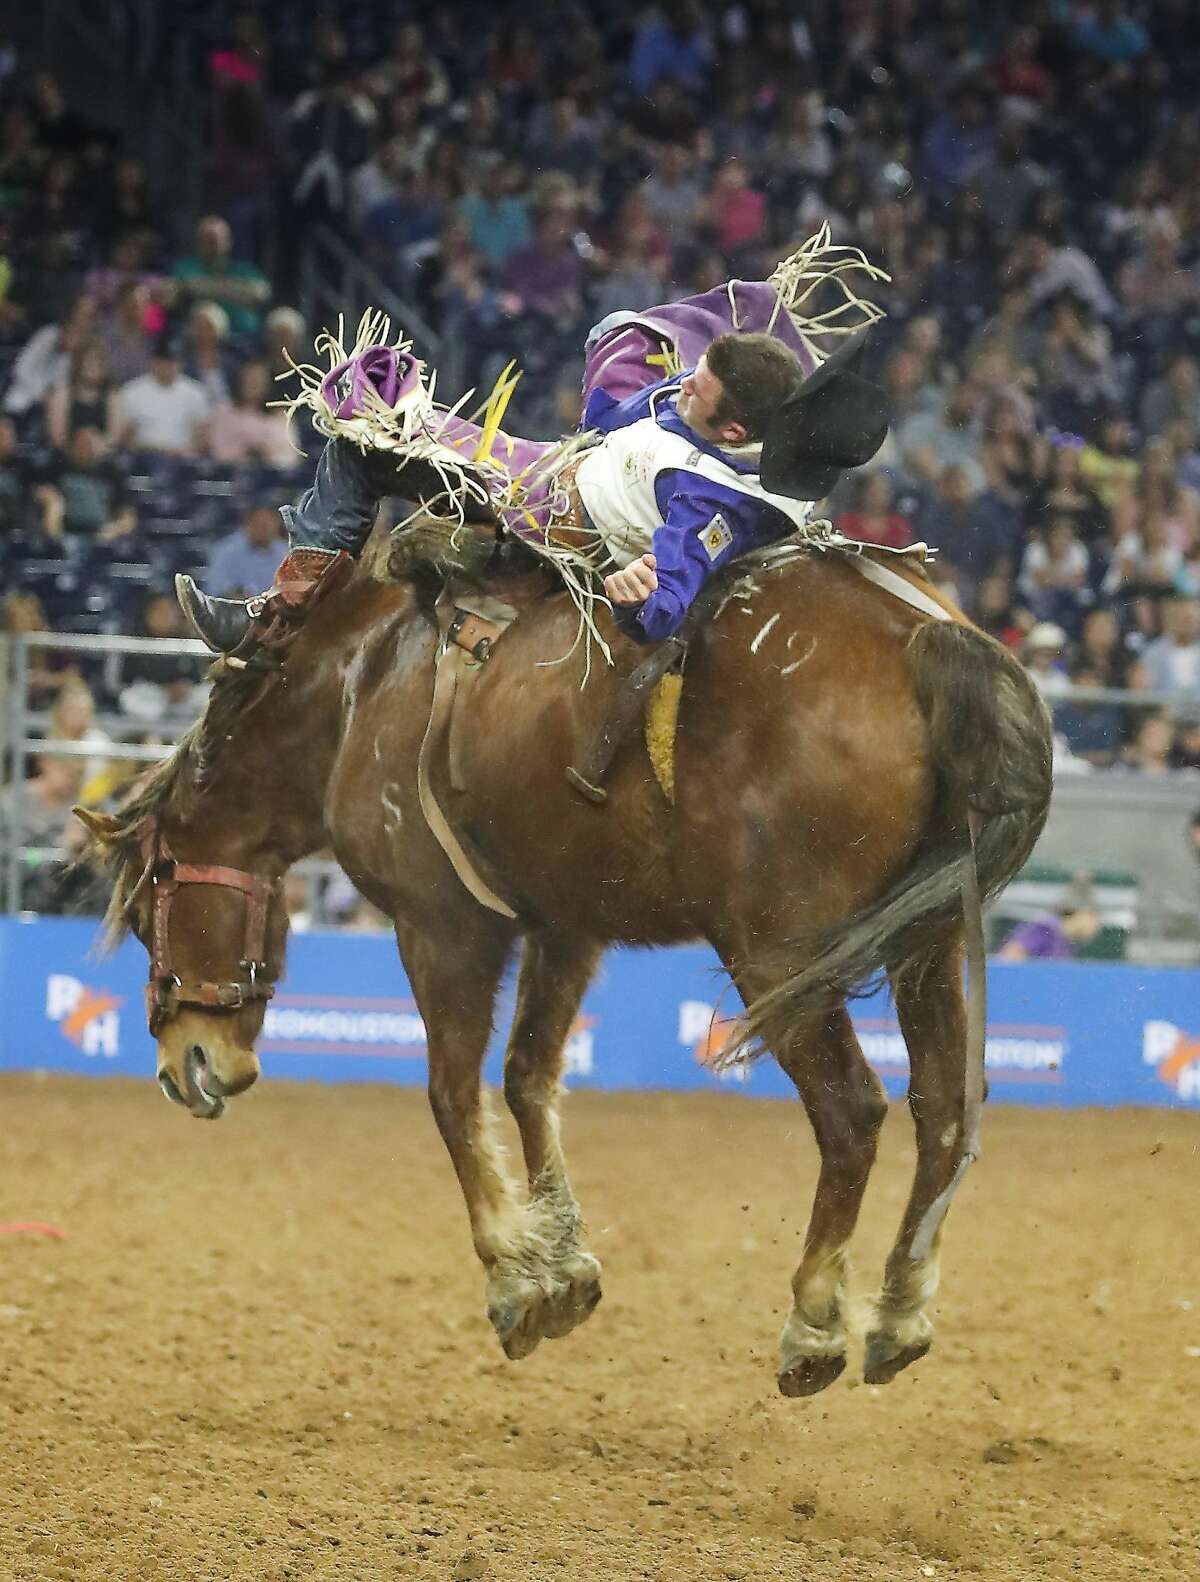 Kaycee Feild loses his hat as he rides Tootsie Roll during Super Series II Round 3 Bareback Riding action at Rodeo Houston Sunday, March 4, 2018, in Houston. ( Steve Gonzales / Houston Chronicle )